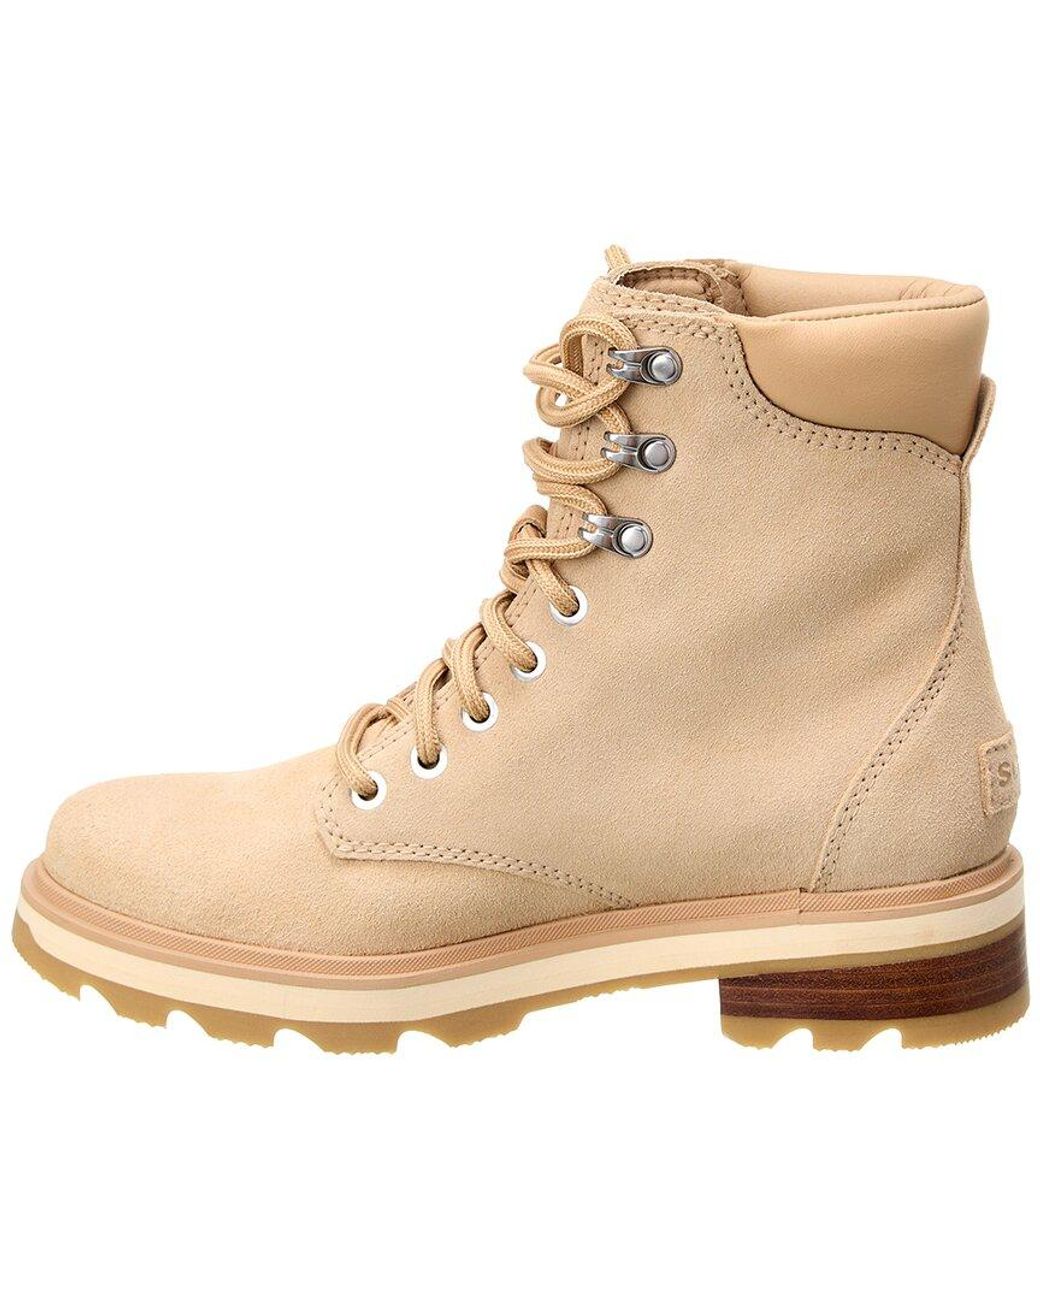 Sorel Lennox Lace-up Stacked Suede Boot in Natural | Lyst